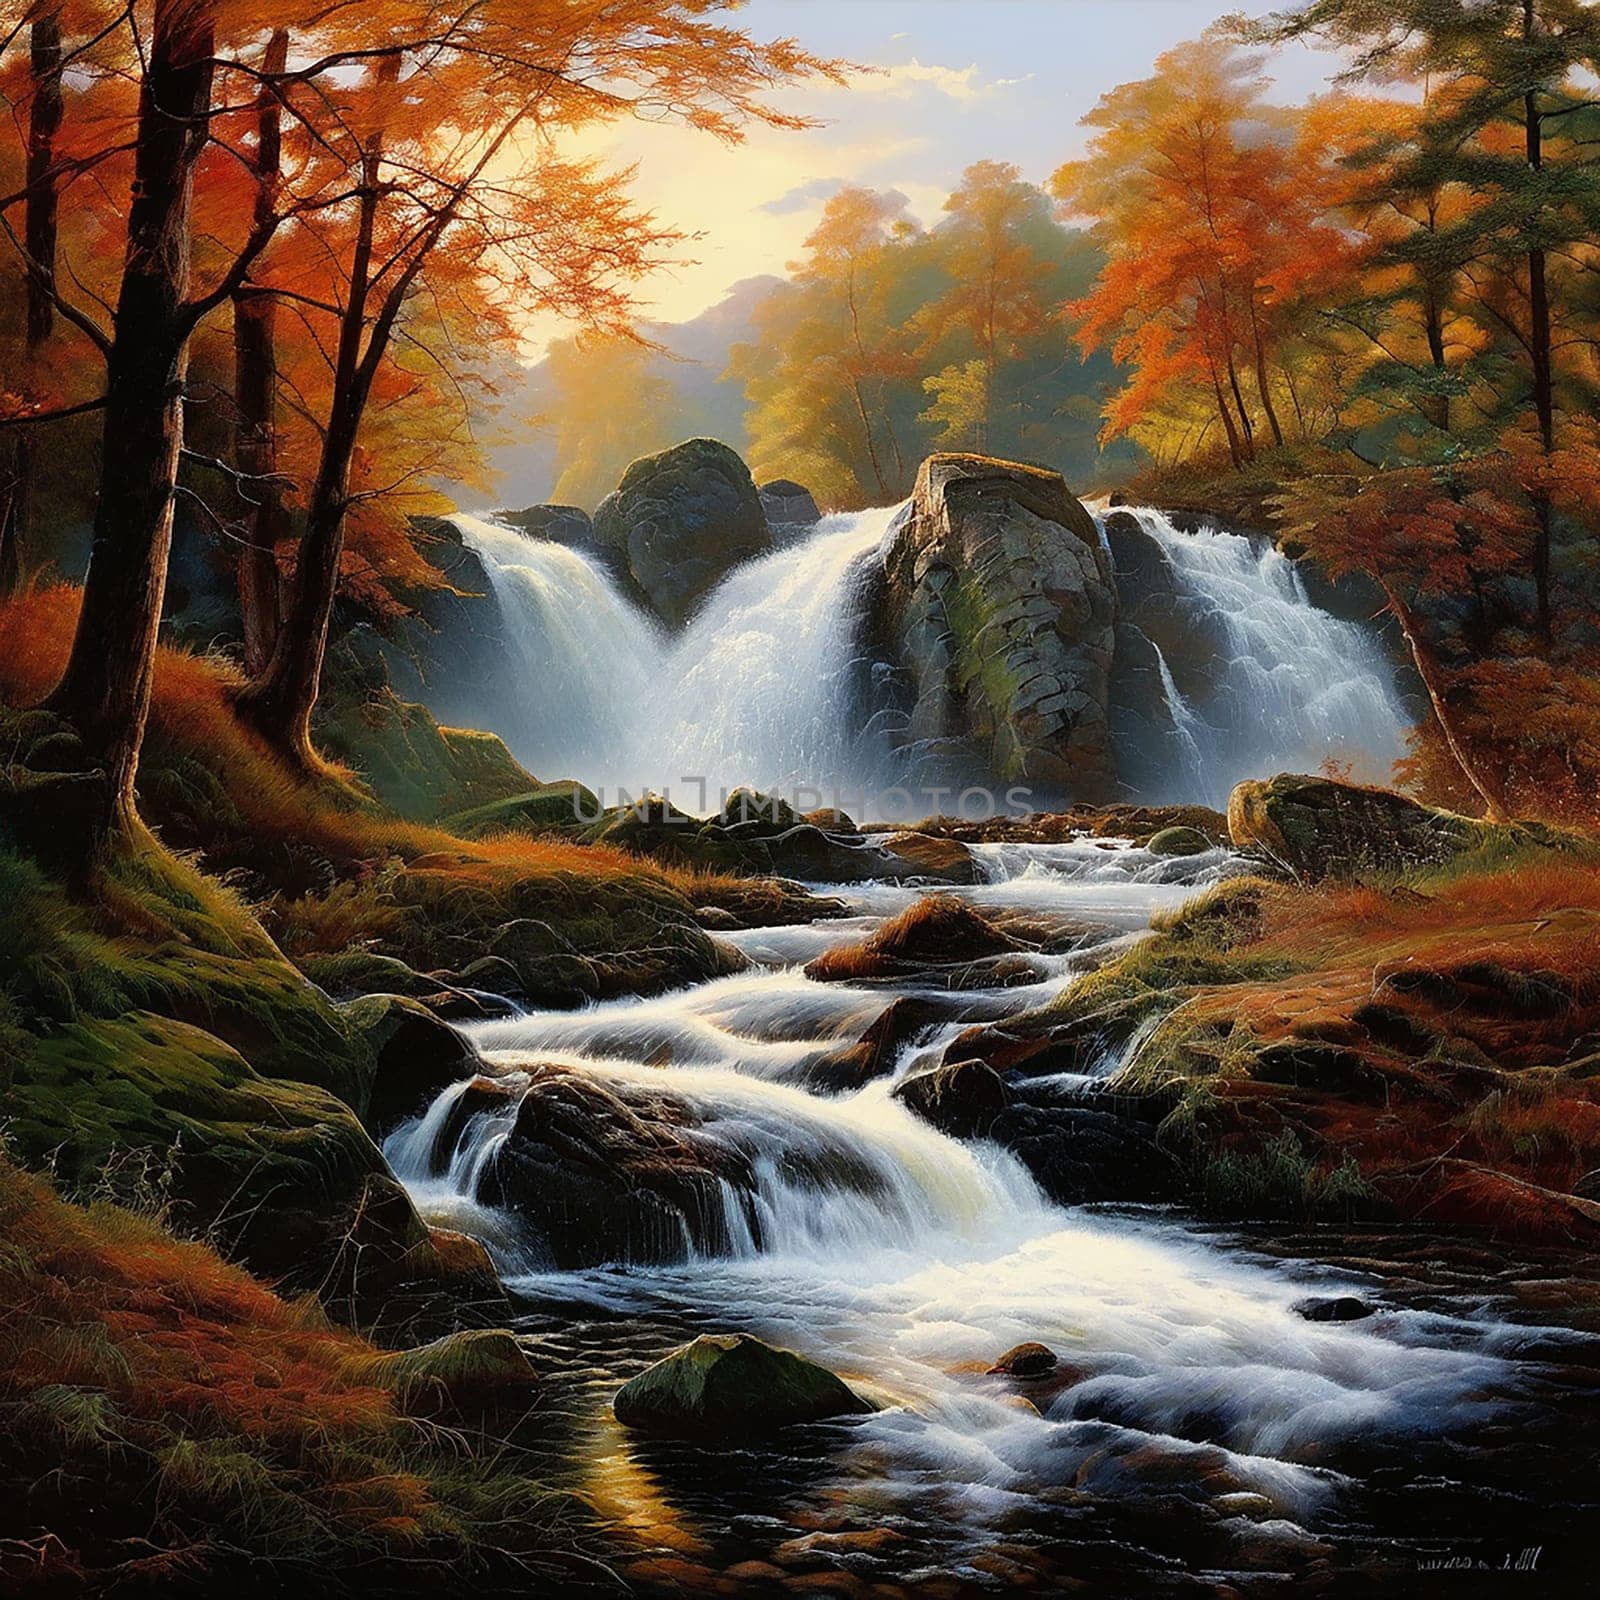 Tranquil Waters: Capturing the Beauty of an Autumn Waterfall Landscape